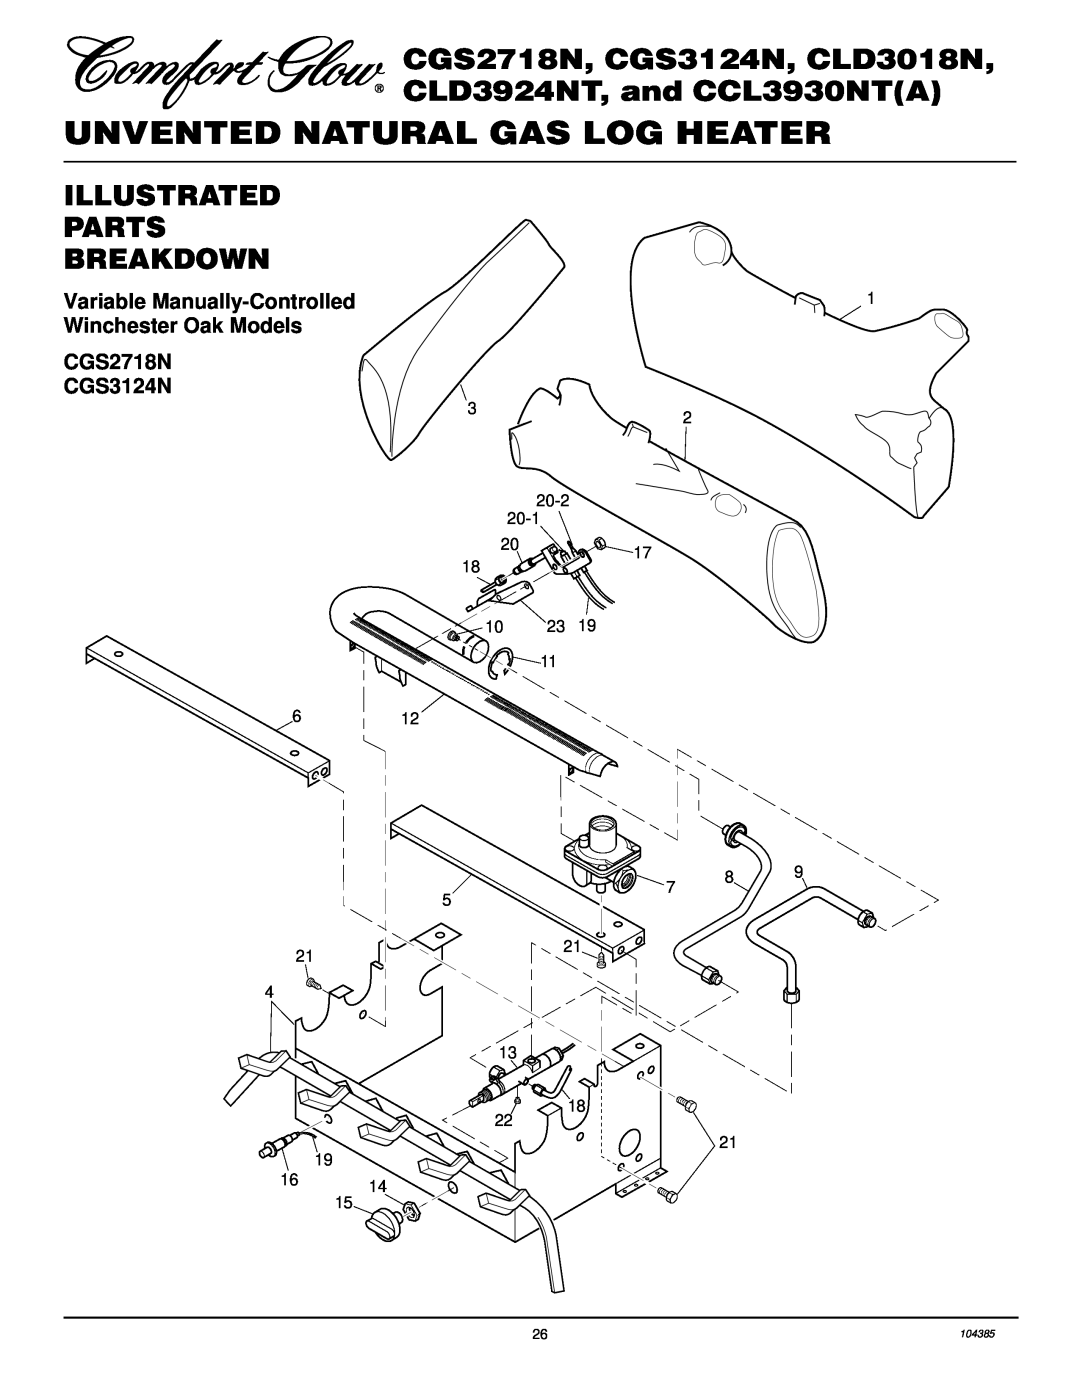 Desa CCL3930NT(A) Illustrated Parts Breakdown, Variable Manually-ControlledWinchester Oak Models, CGS2718N CGS3124N 